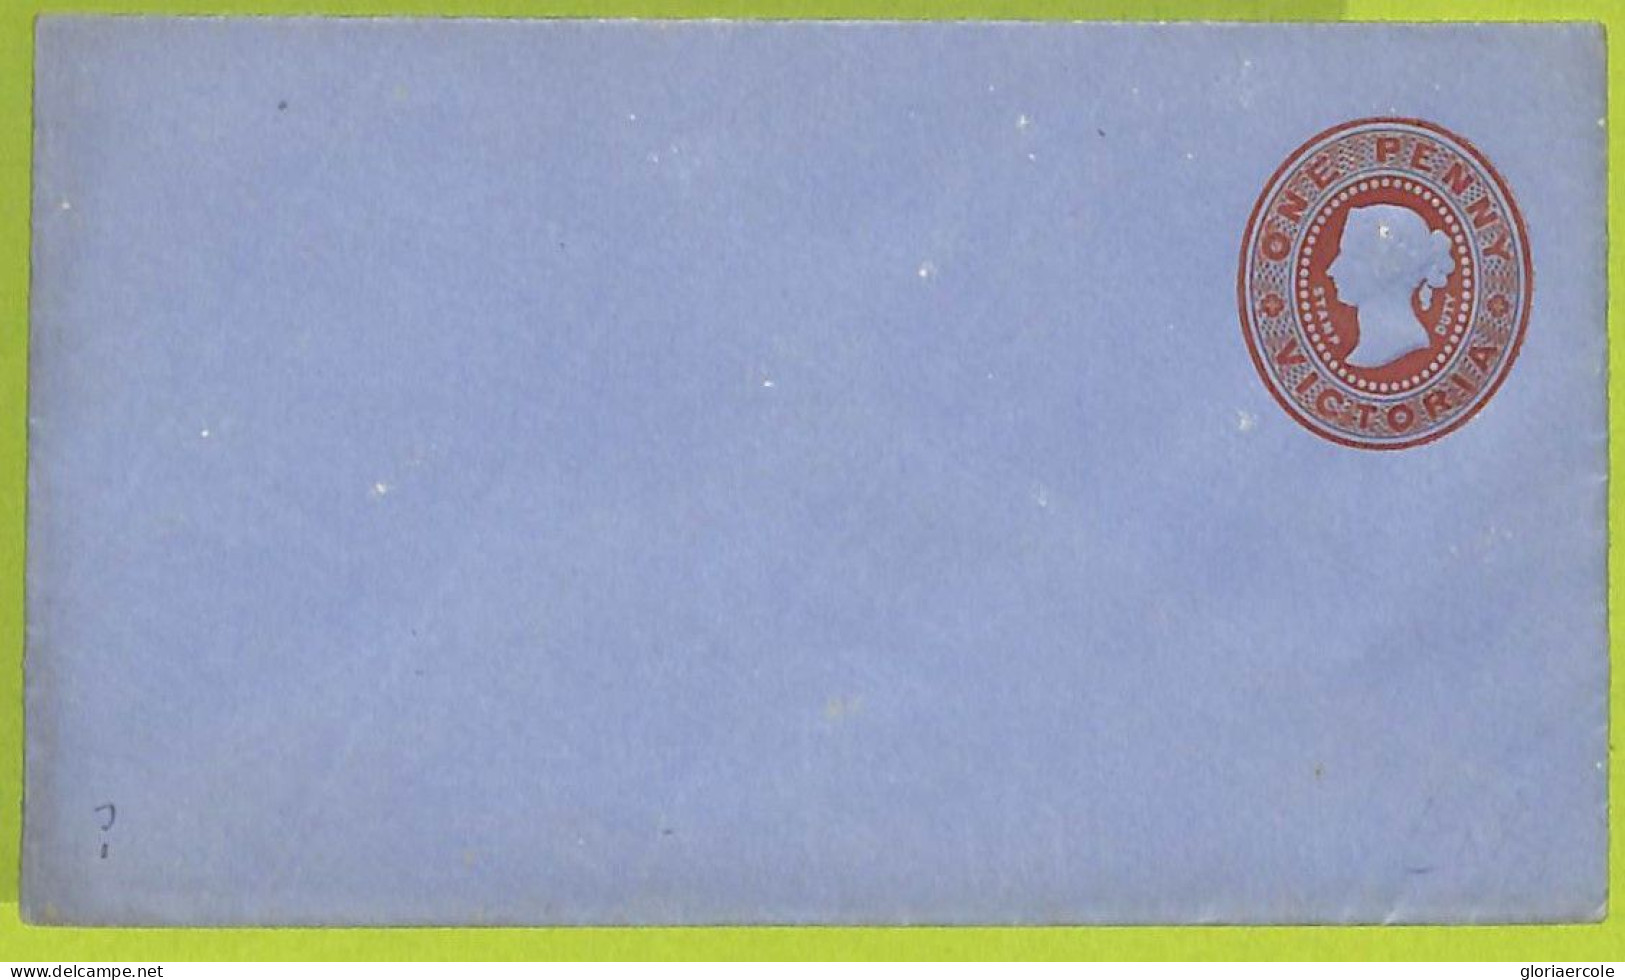 40206 - VICTORIA - Postal History - STATIONERY COVER Printed To Order BLUE LAID PAPER 1 P - 136*78 - Cartas & Documentos